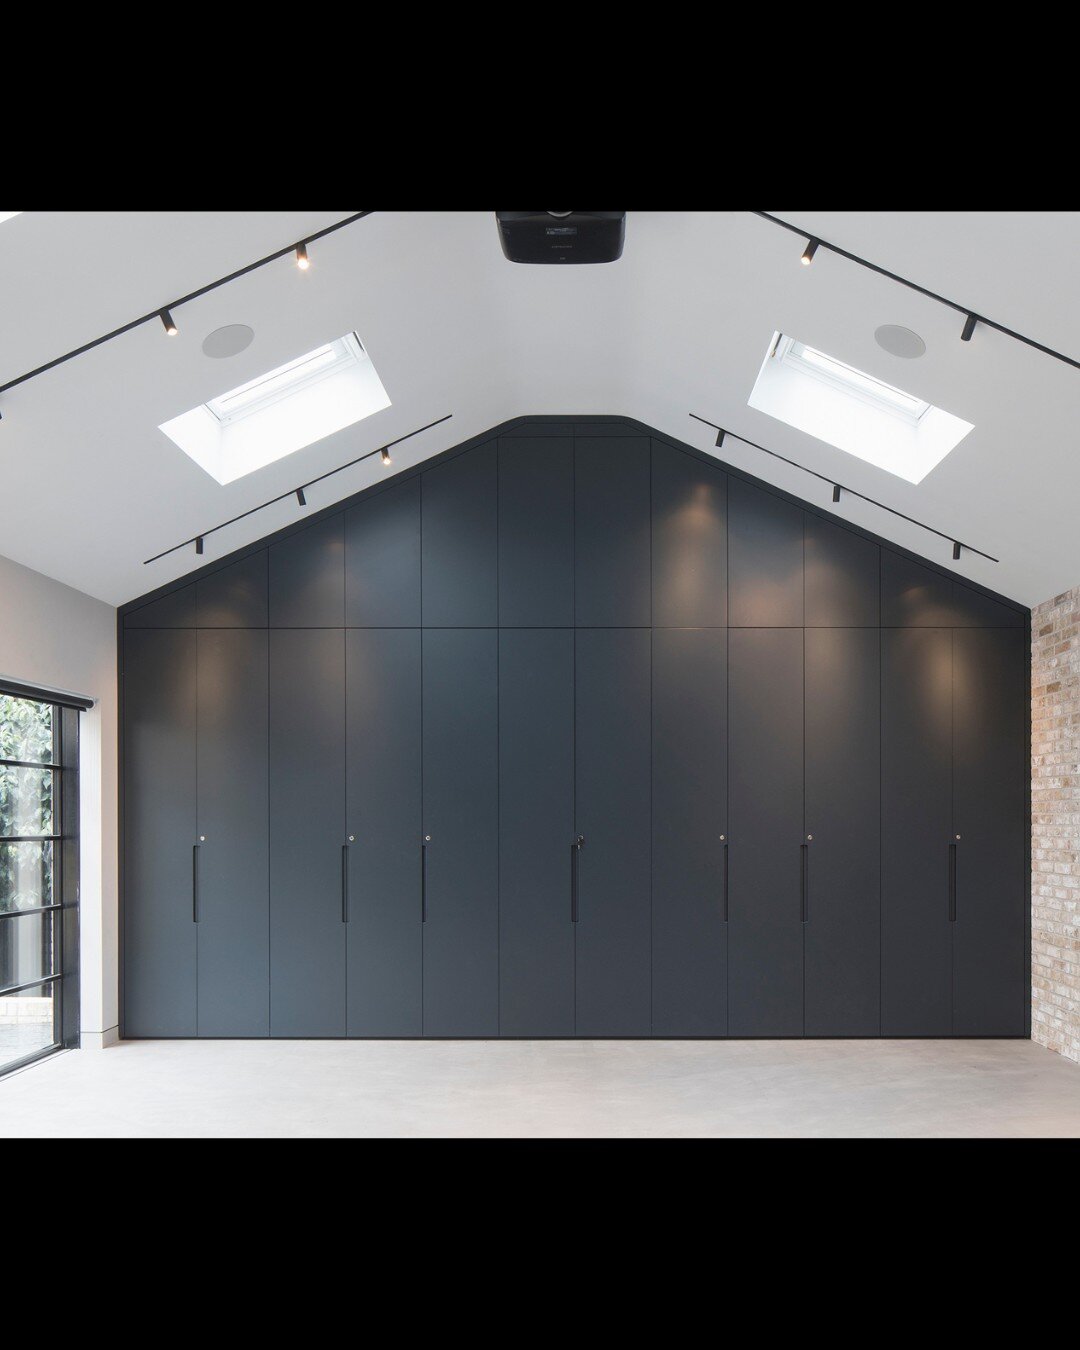 Wrights love a Commercial project and this one was no exception.

This photographic studio was a dream to create, collaborating with our sister companies, West Green &amp; Woodmans. All cabinet fronts are created from MR MDF with Blum soft closing hi